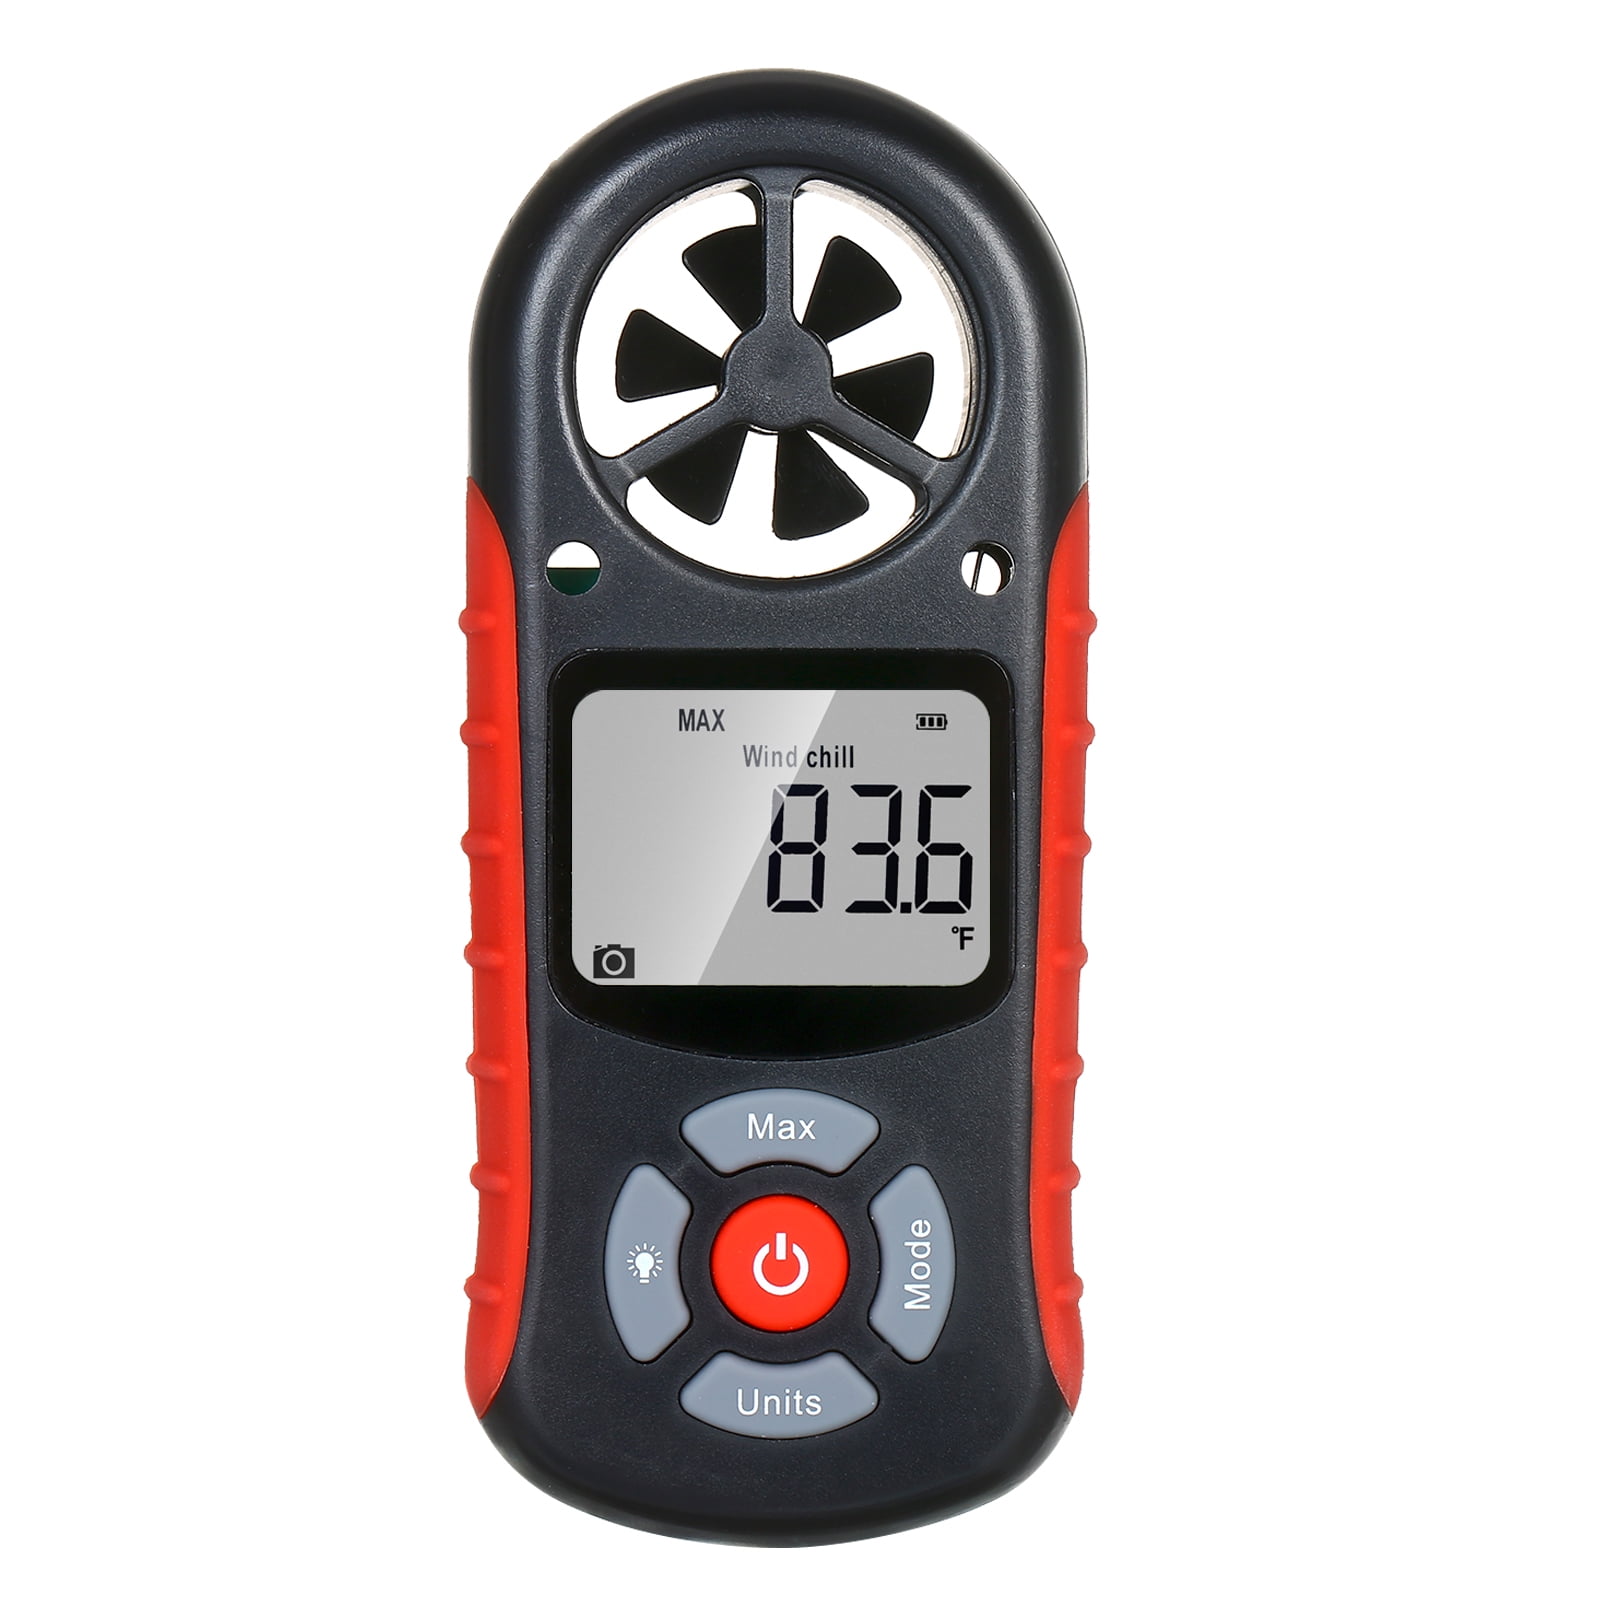 JF-XUAN Precise instrument Handheld Digital Anemometer Thermometer Wind Speed Meter Air Velocity Temperature Tester Color LCD with Max/Min/Data Hold Mode Wind Meter